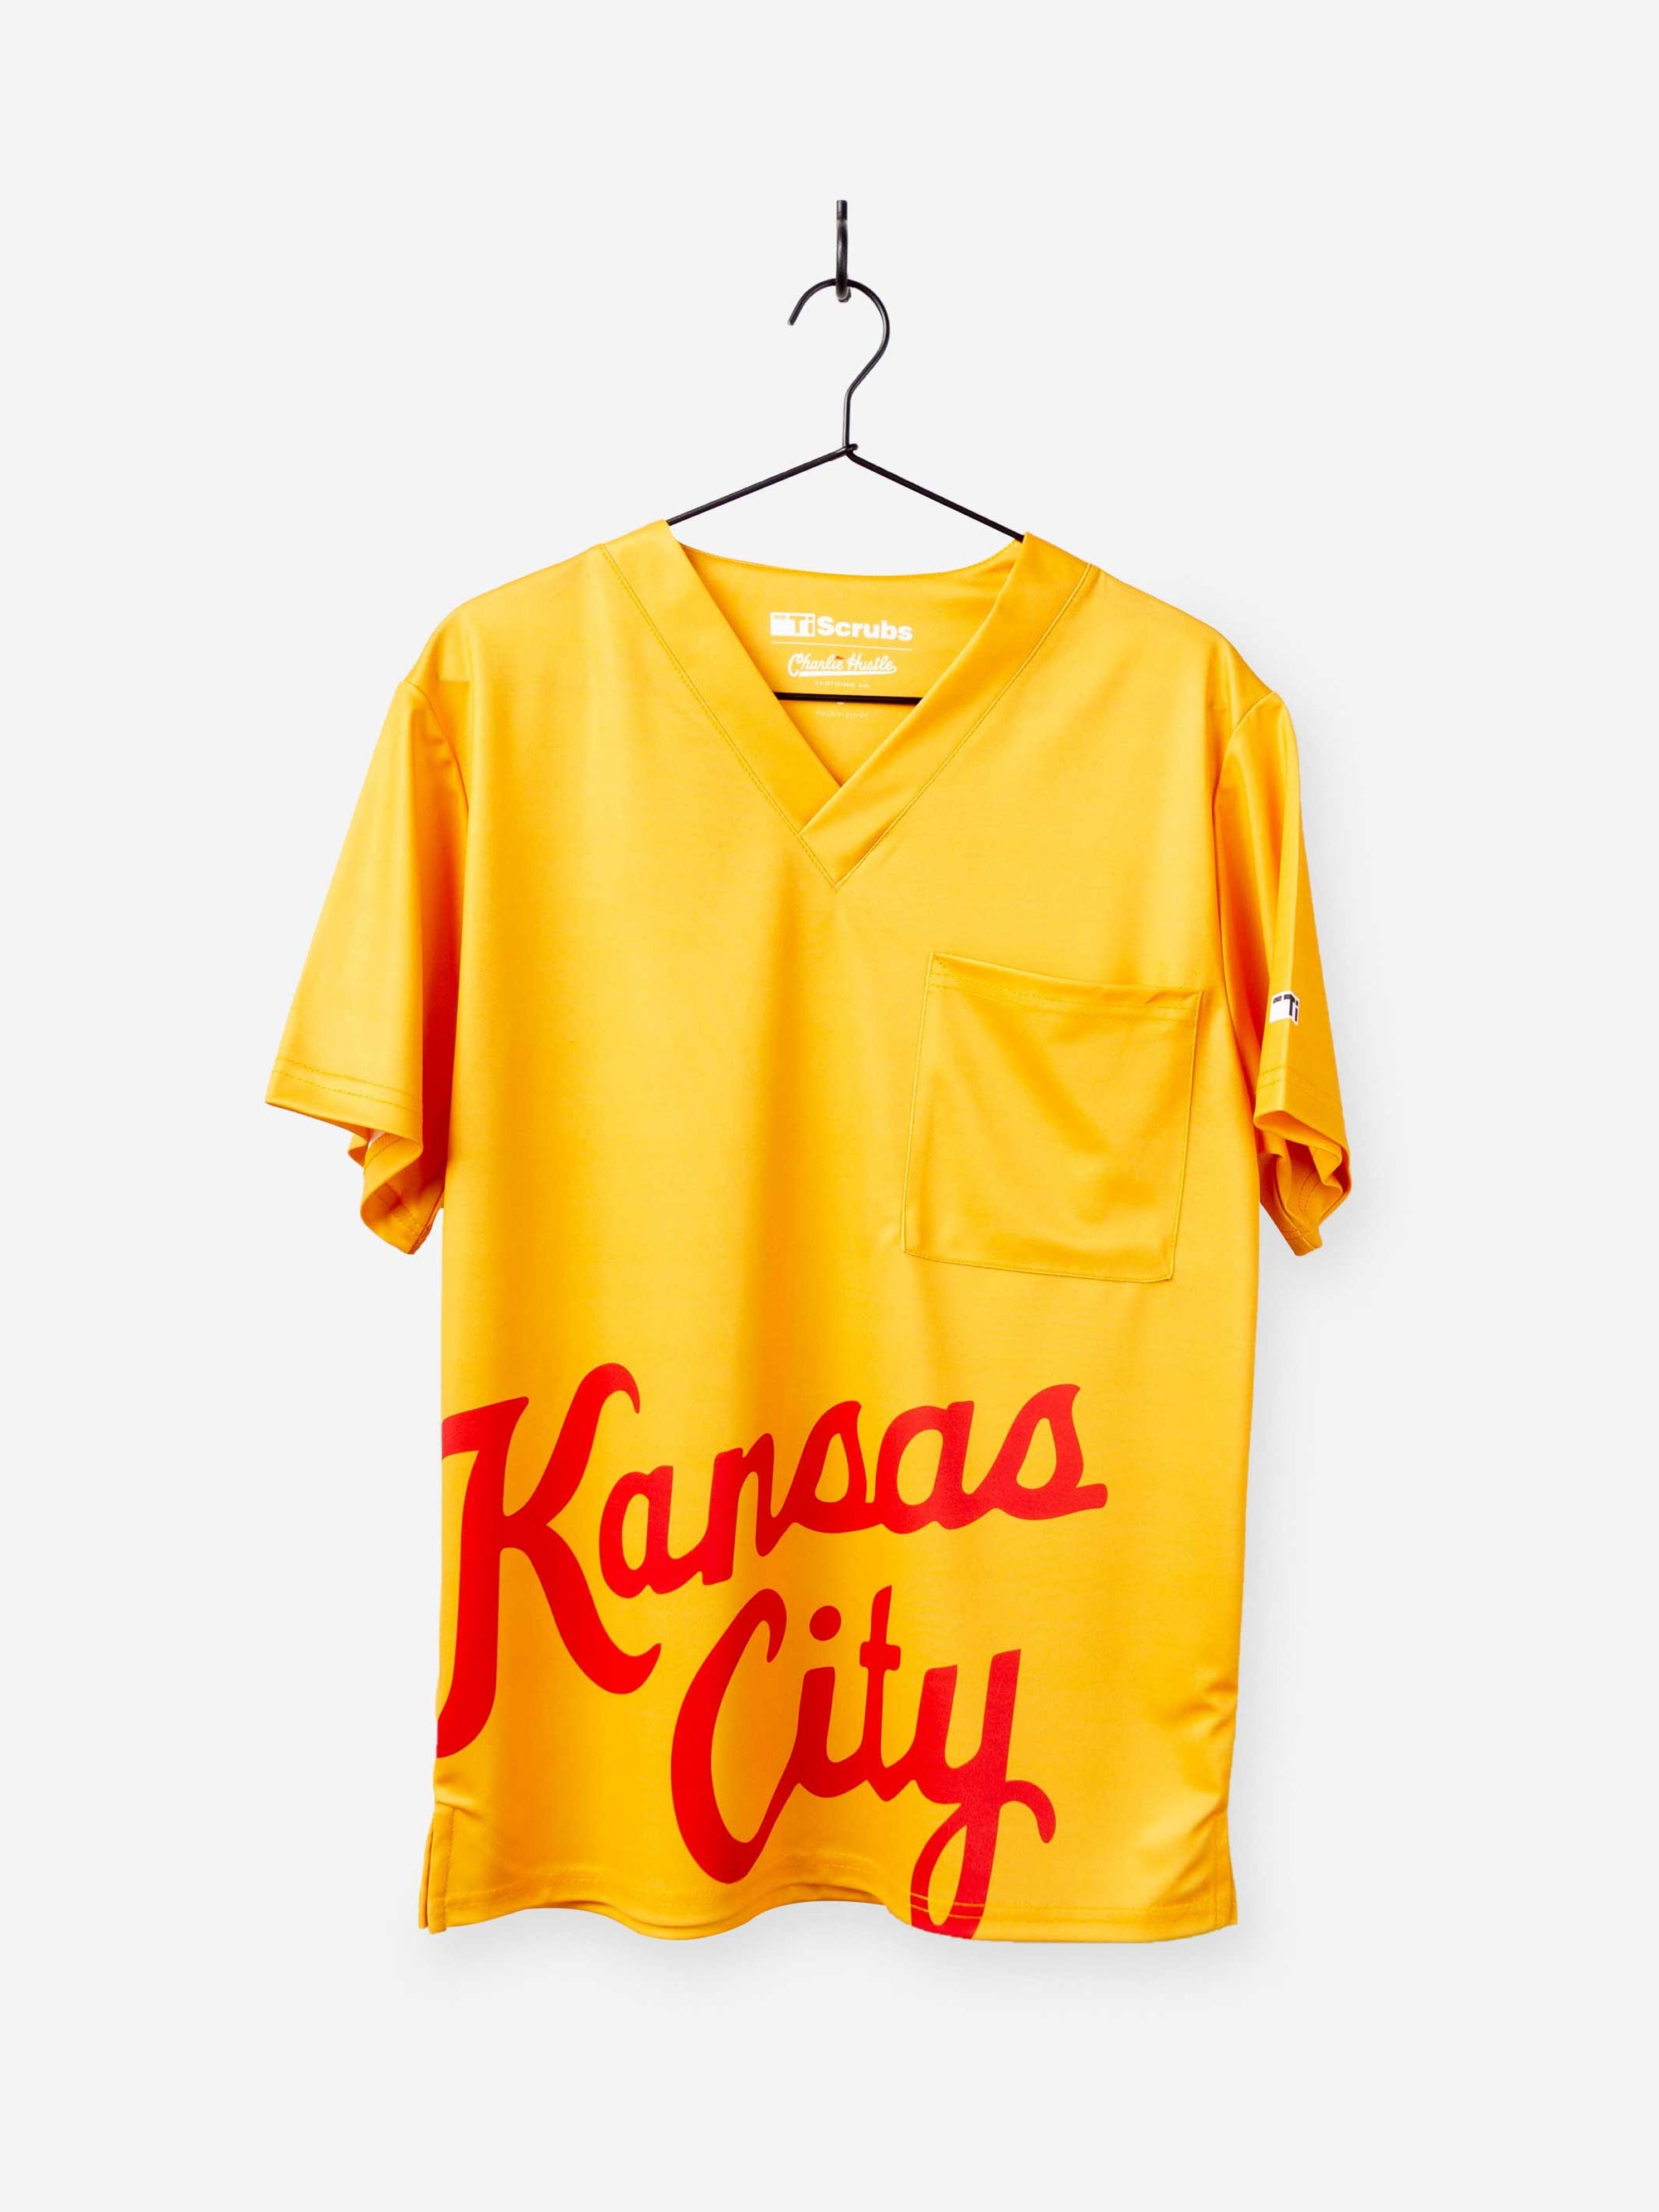 Men's Charlie Hustle Print Scrub Top with Kansas City Script in Gold and Red with Chest Pocket